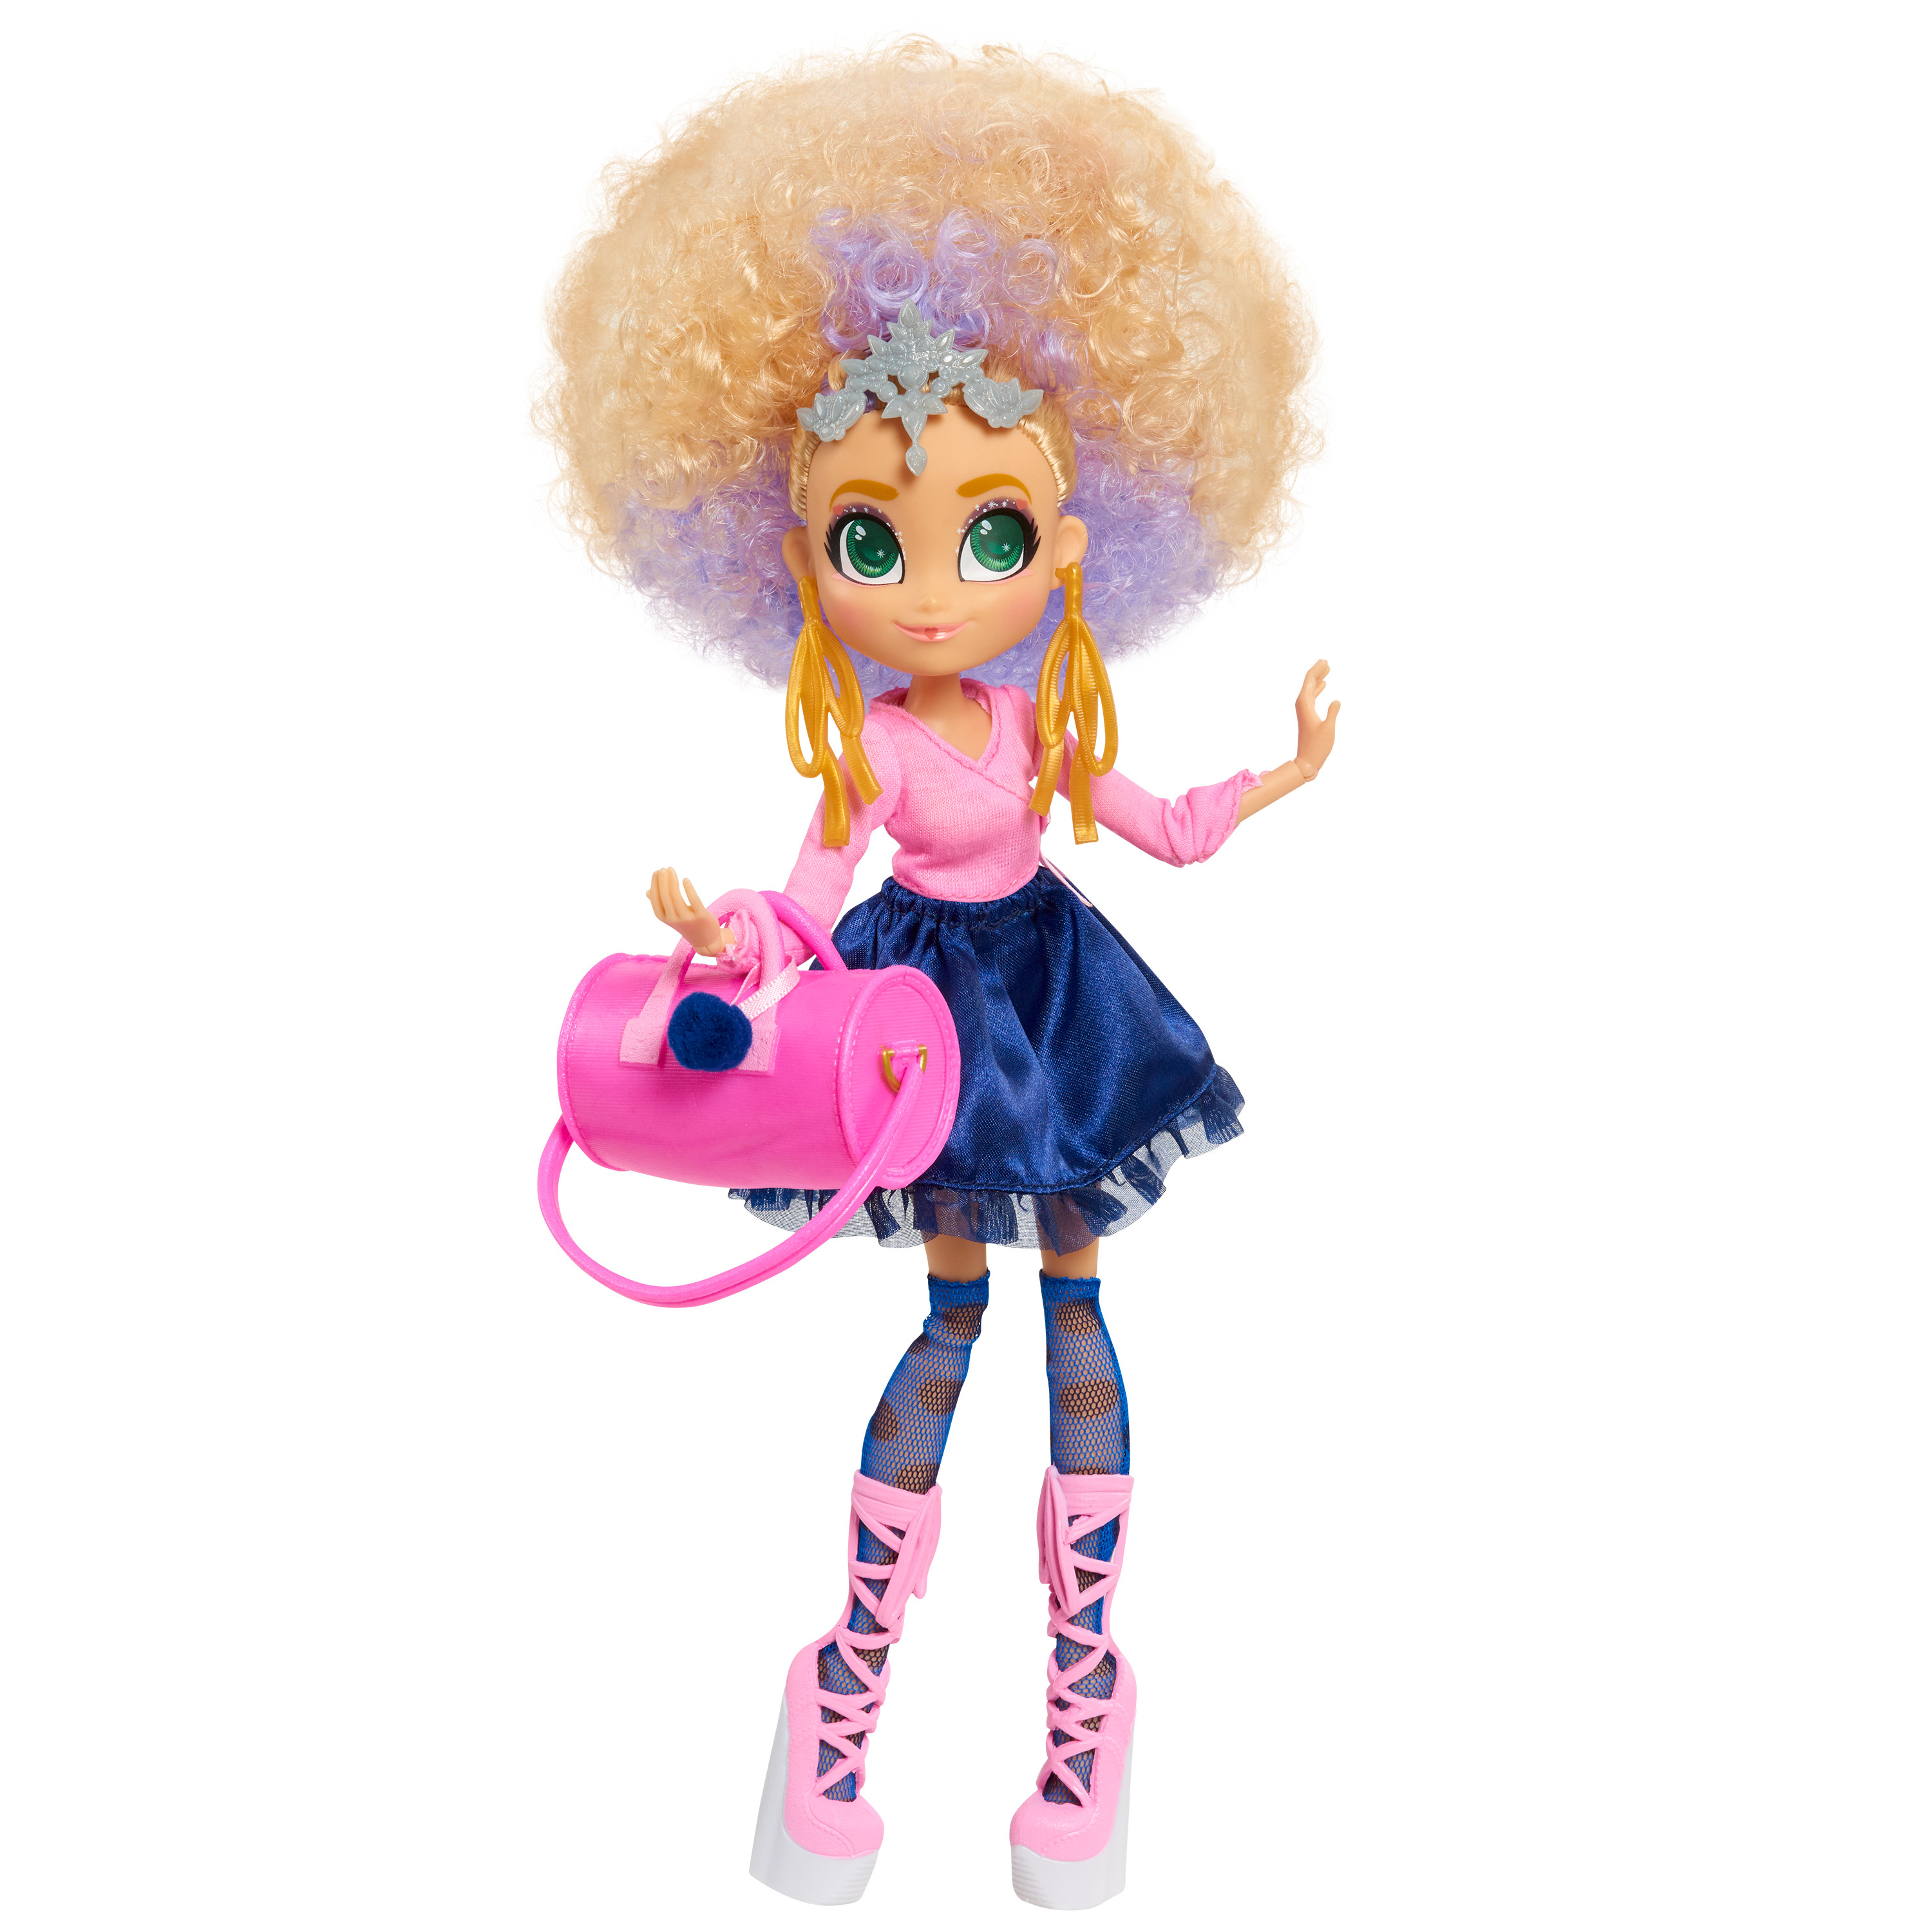 Hairdorables Hairmazing Bella Fashion Doll, Blonde and Purple Curly Hair, Pink Outfit, Ballerina Dancer,  Kids Toys for Ages 3 Up, Gifts and Presents - image 1 of 5